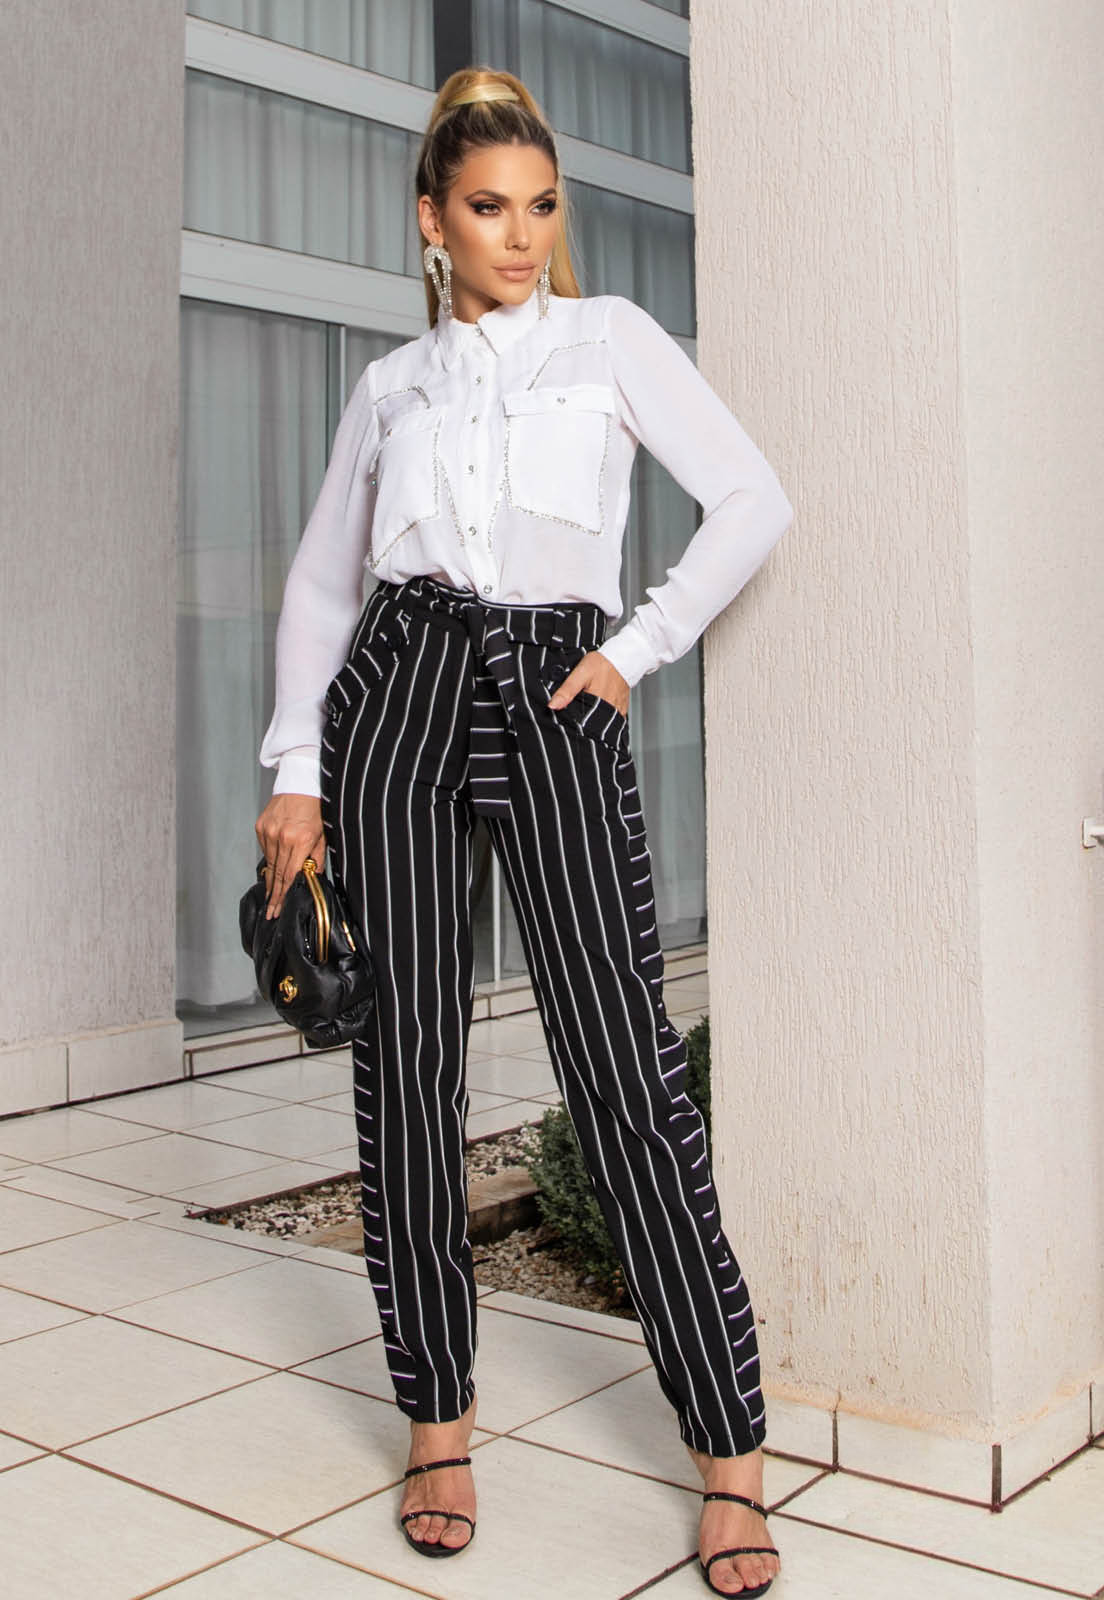 BLACK TAILORED TROUSERS